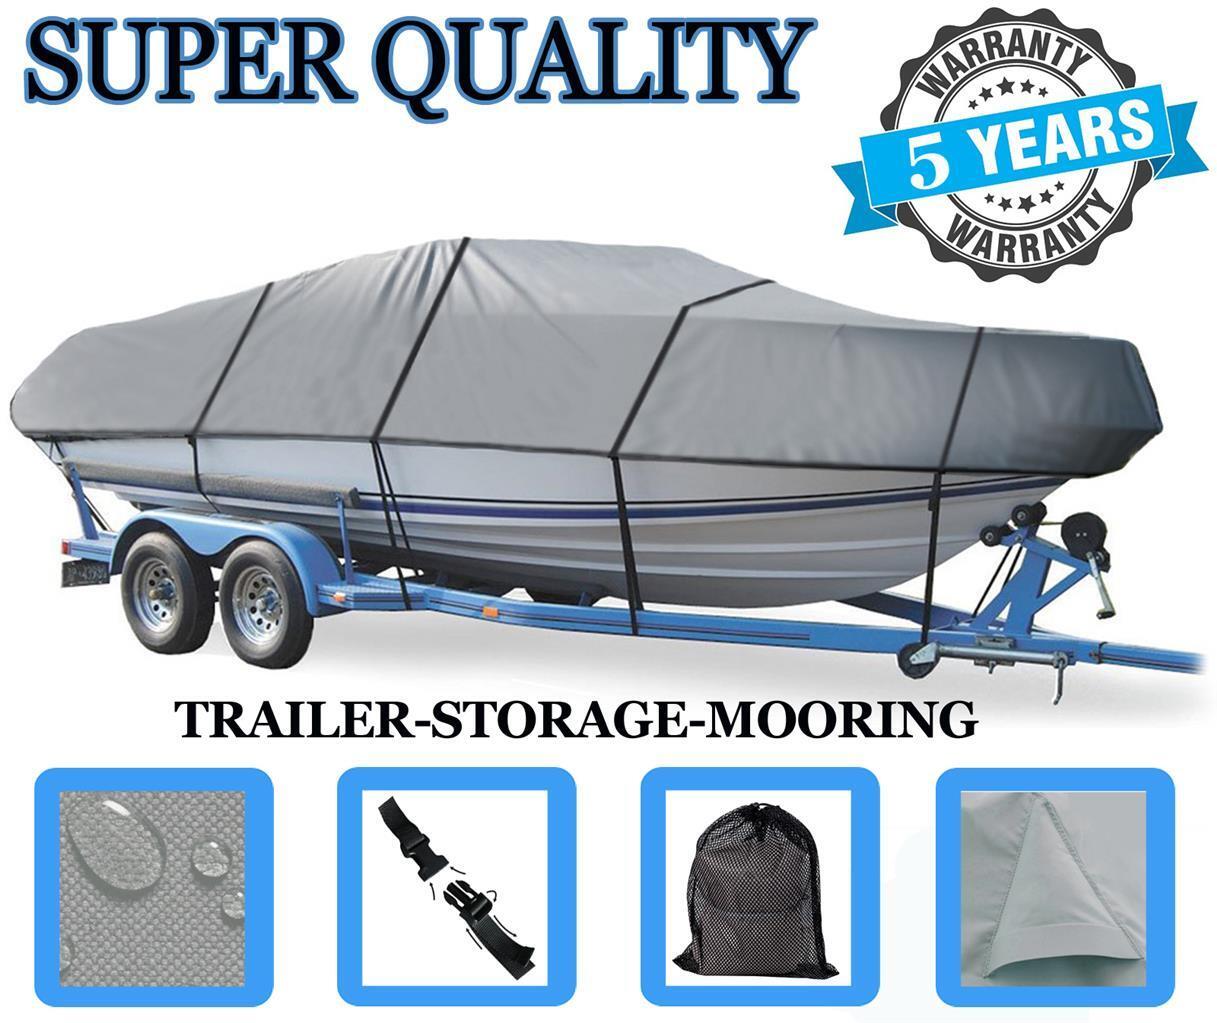 GREY BOAT COVER FOR Super Kansas City Mall beauty product restock quality top GALAXIE OF 1900 I 2006-2008 TEXAS ULTRA O